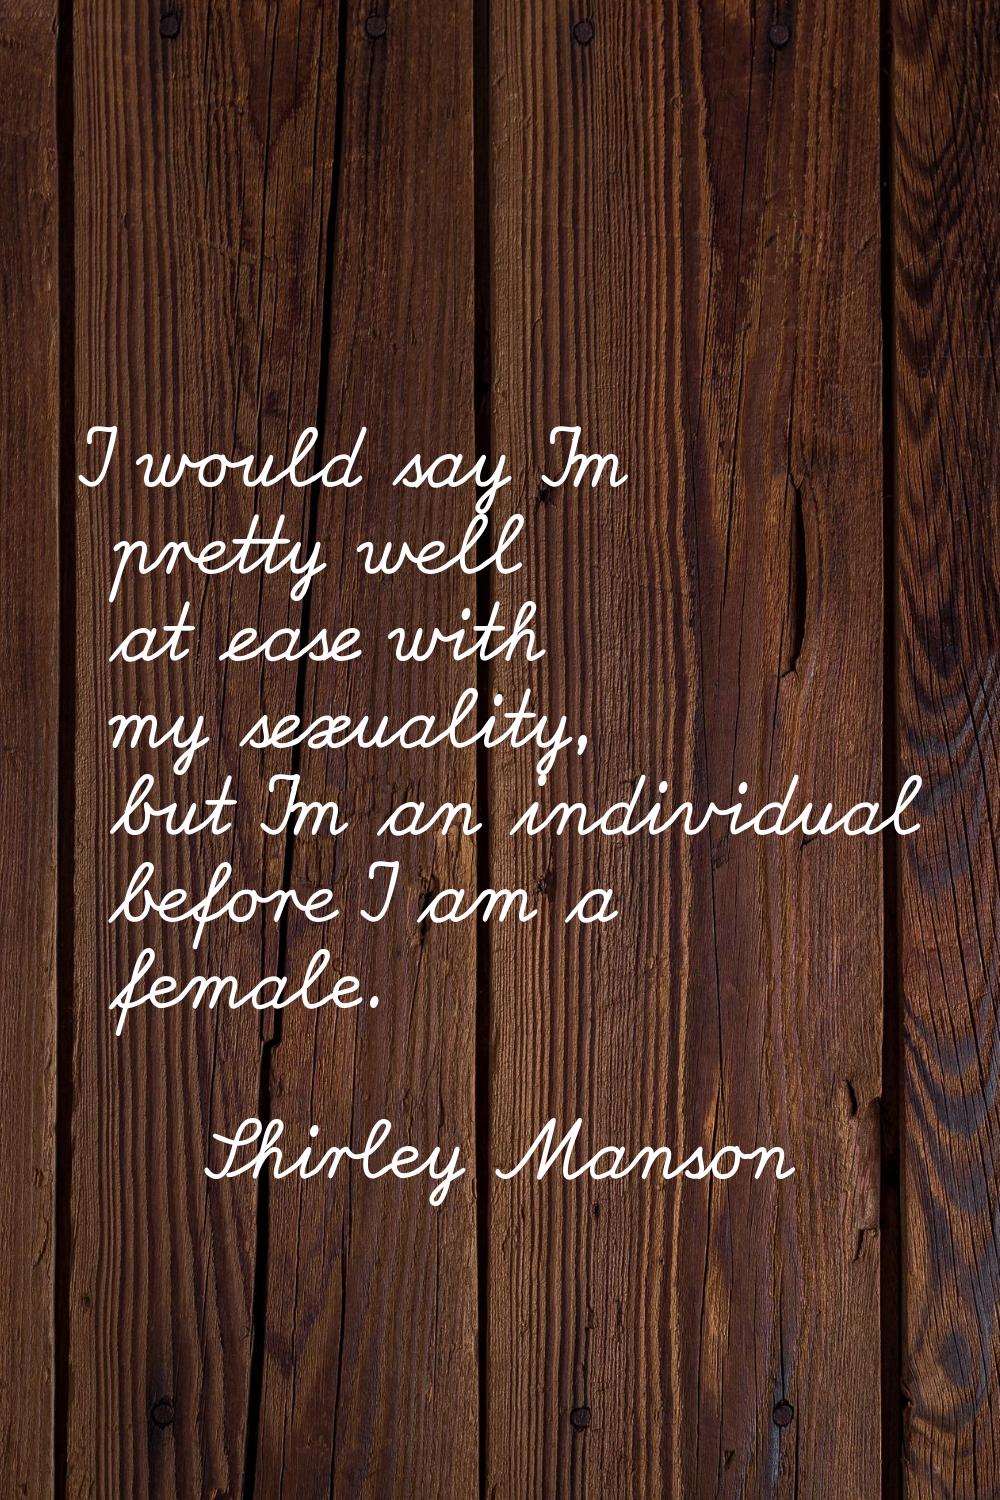 I would say I'm pretty well at ease with my sexuality, but I'm an individual before I am a female.